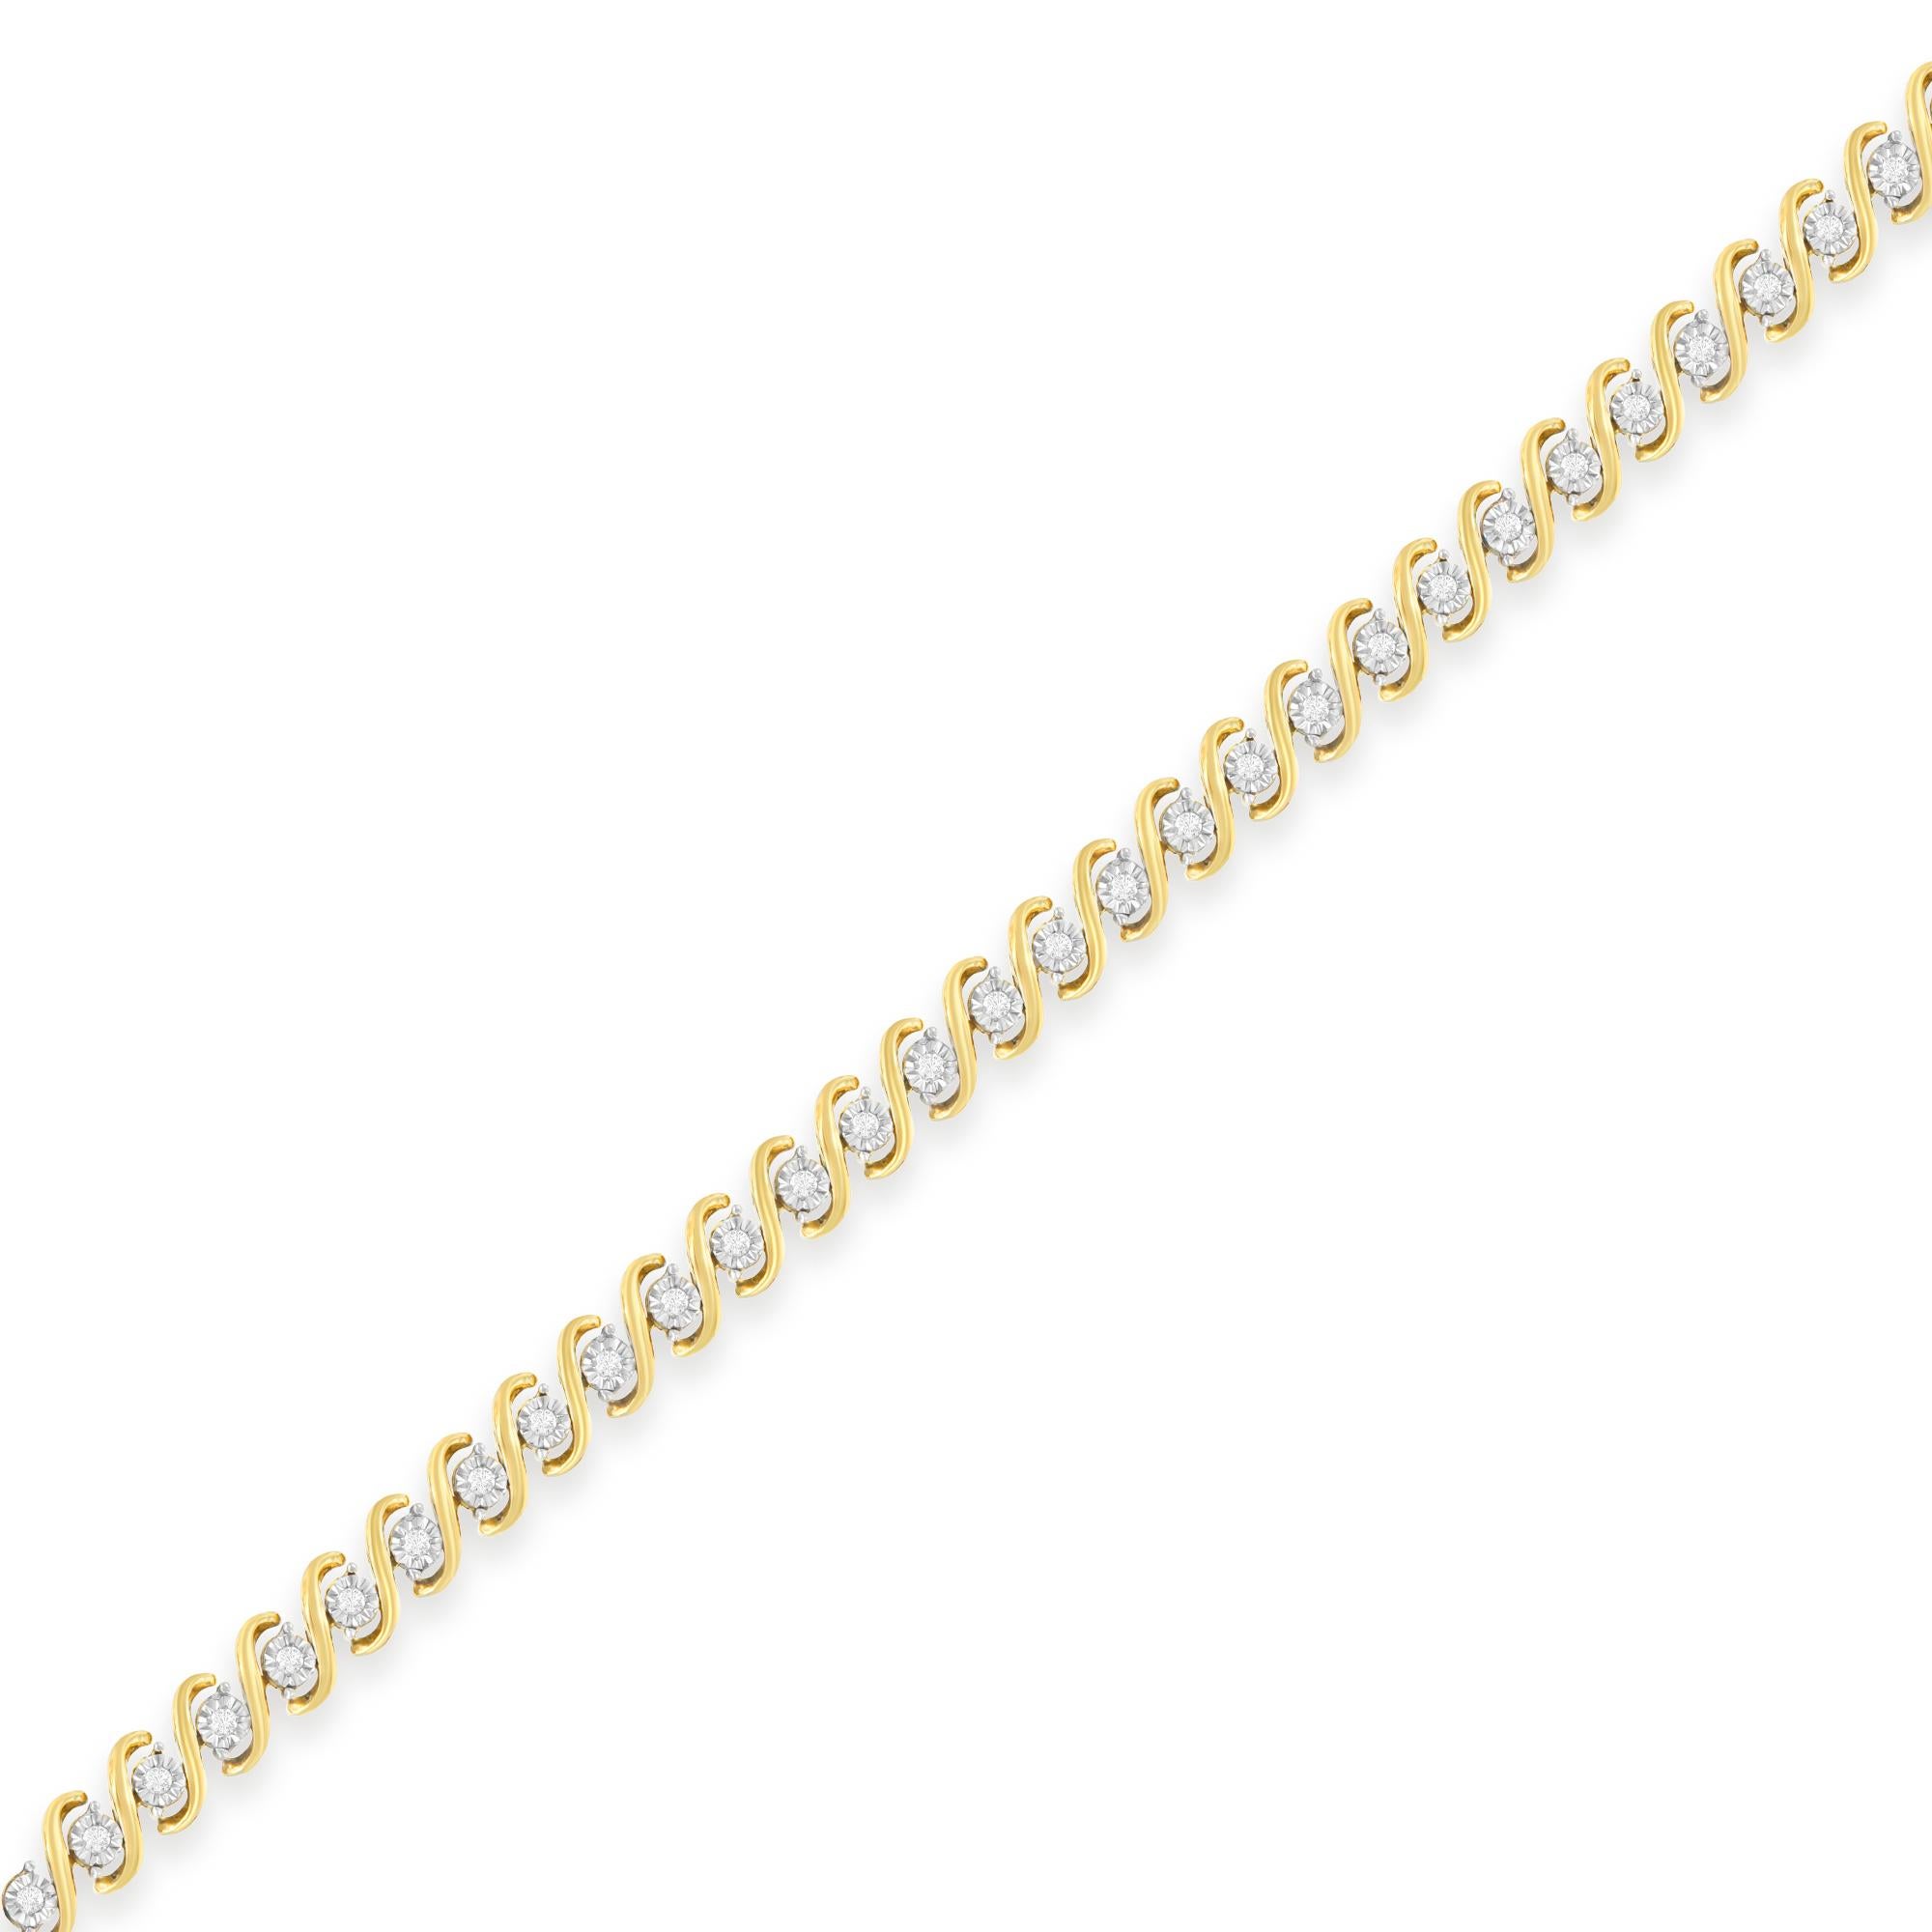 Contemporary 10K Yellow Gold Plated Sterling Silver Round-Cut 0.5 Carat Diamond Bracelet For Sale